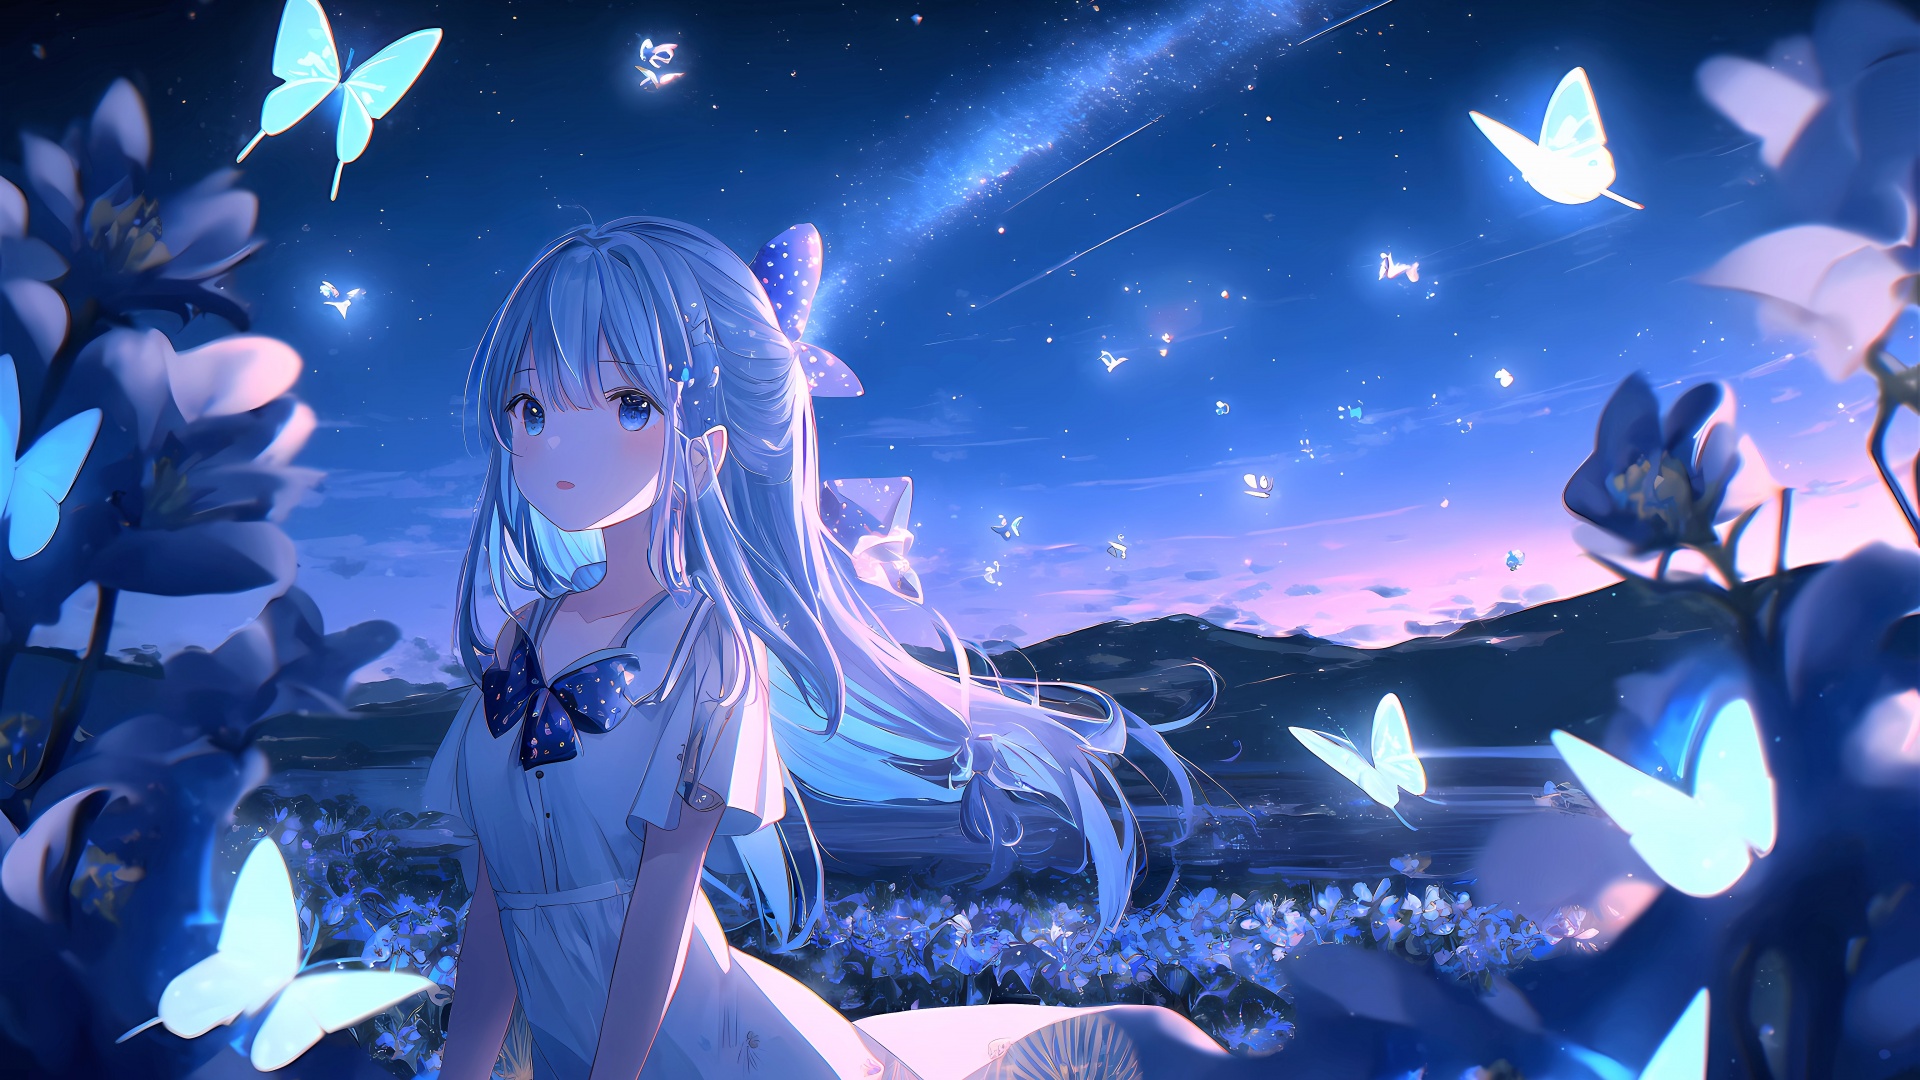 Details more than 90 wallpaper anime 1366x768 best - in.duhocakina